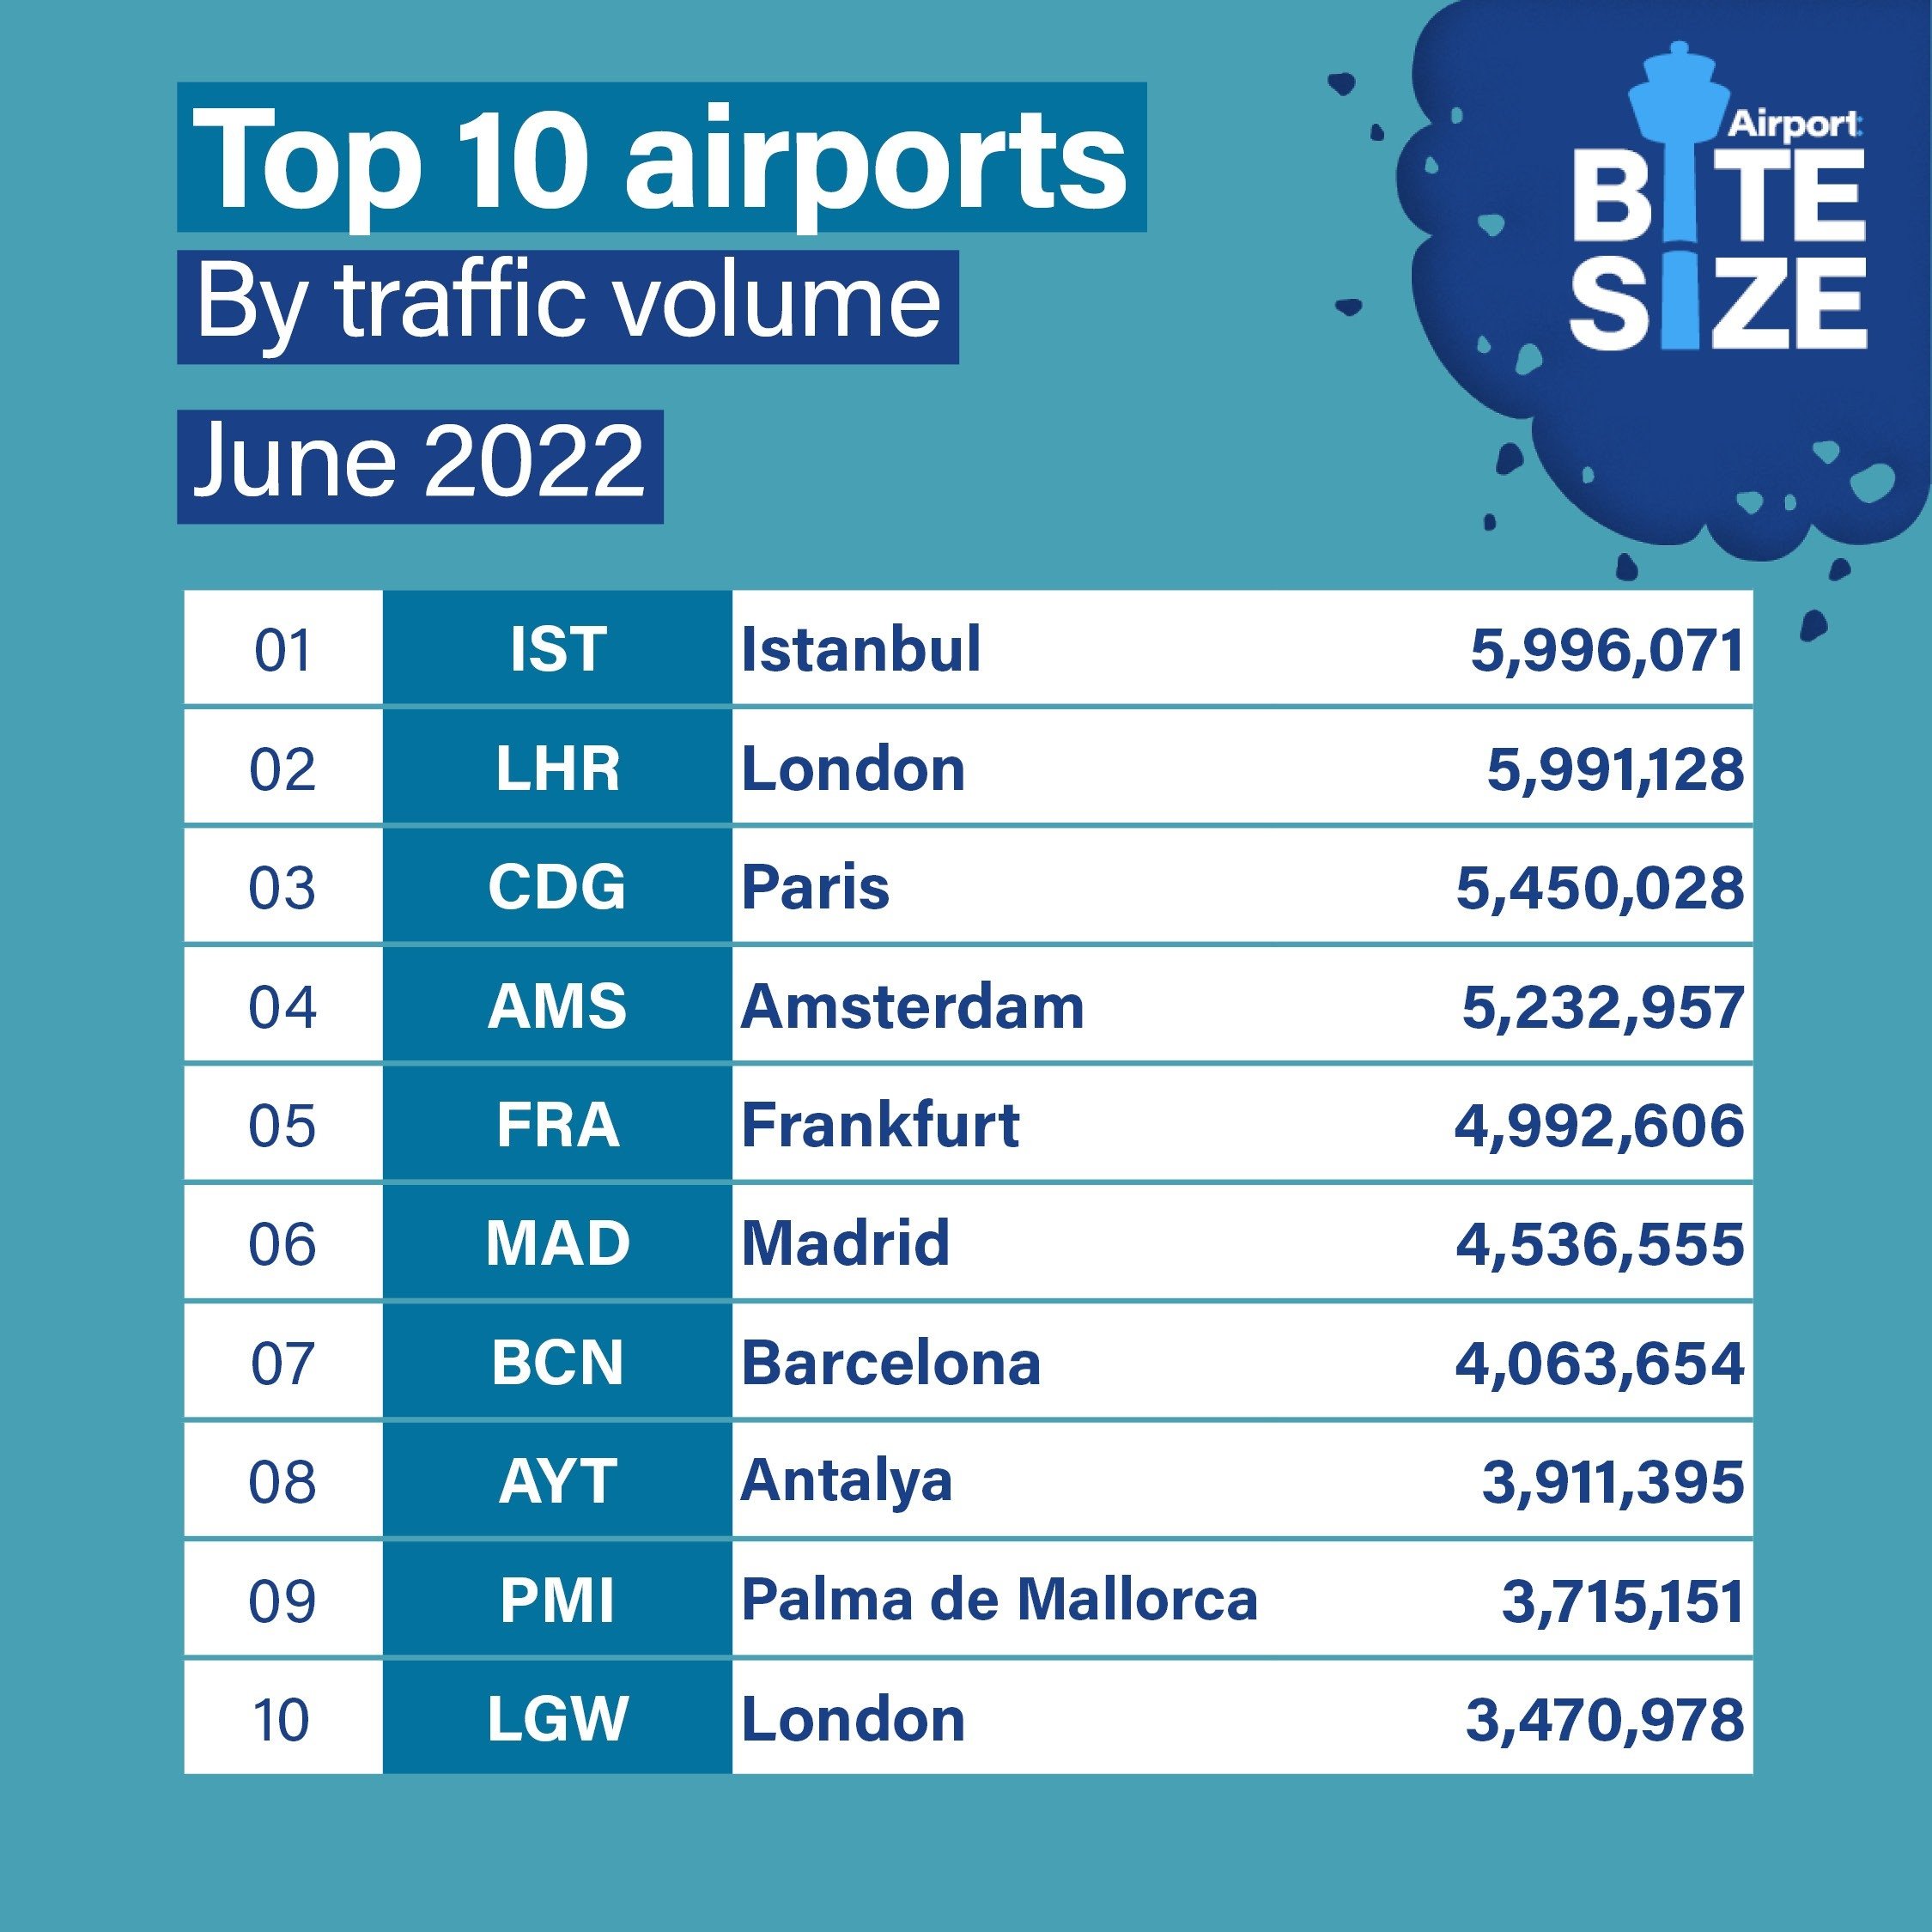 Istanbul Airport became the most visited airport in Europe, serving just under 6 million passengers in June 2022. (IHA Photo)